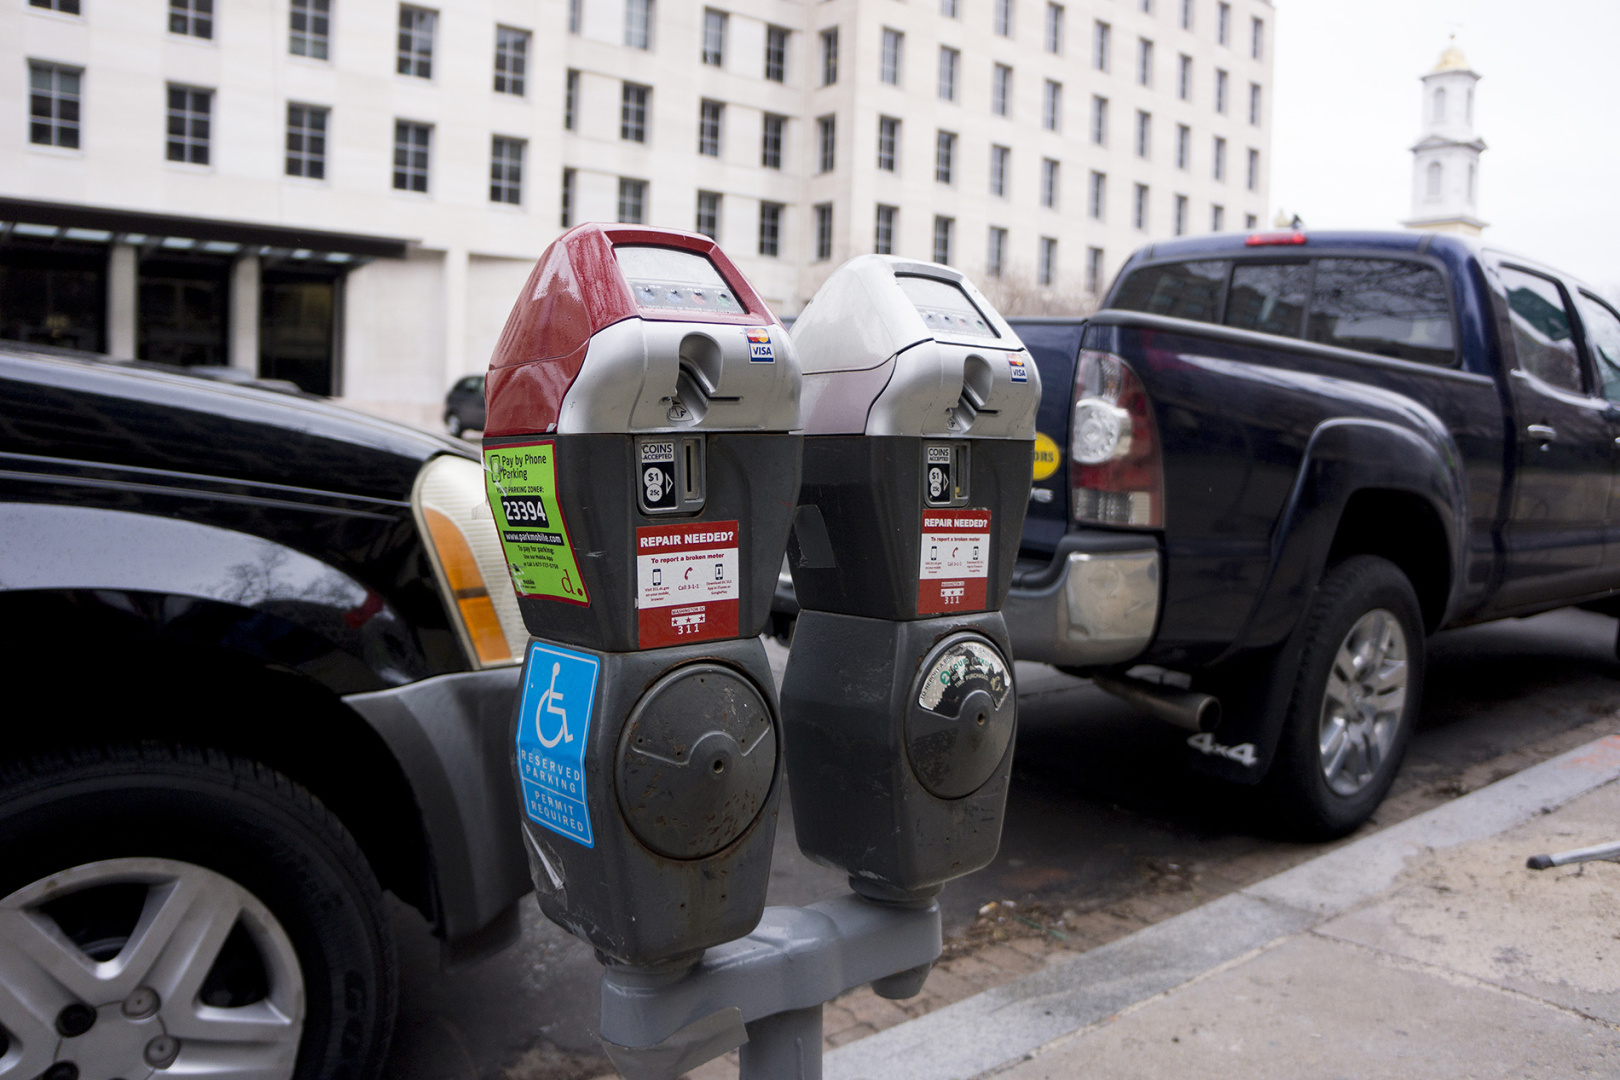 A parking meter that takes credit cards